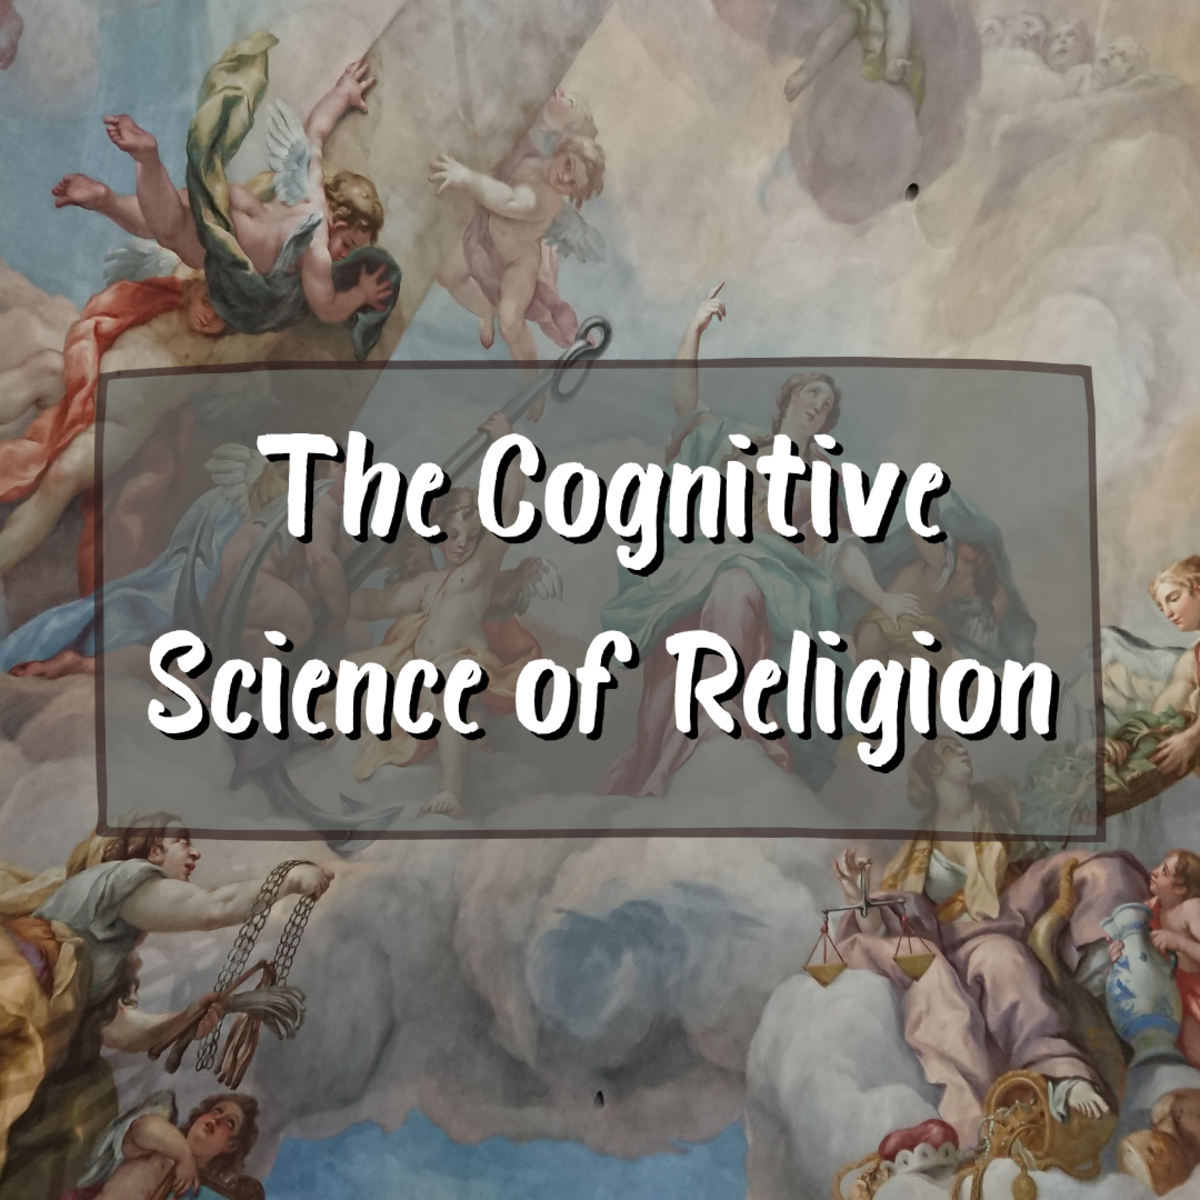 Learn about 13 important ways cognitive science has shed light on the role of religion in the world.